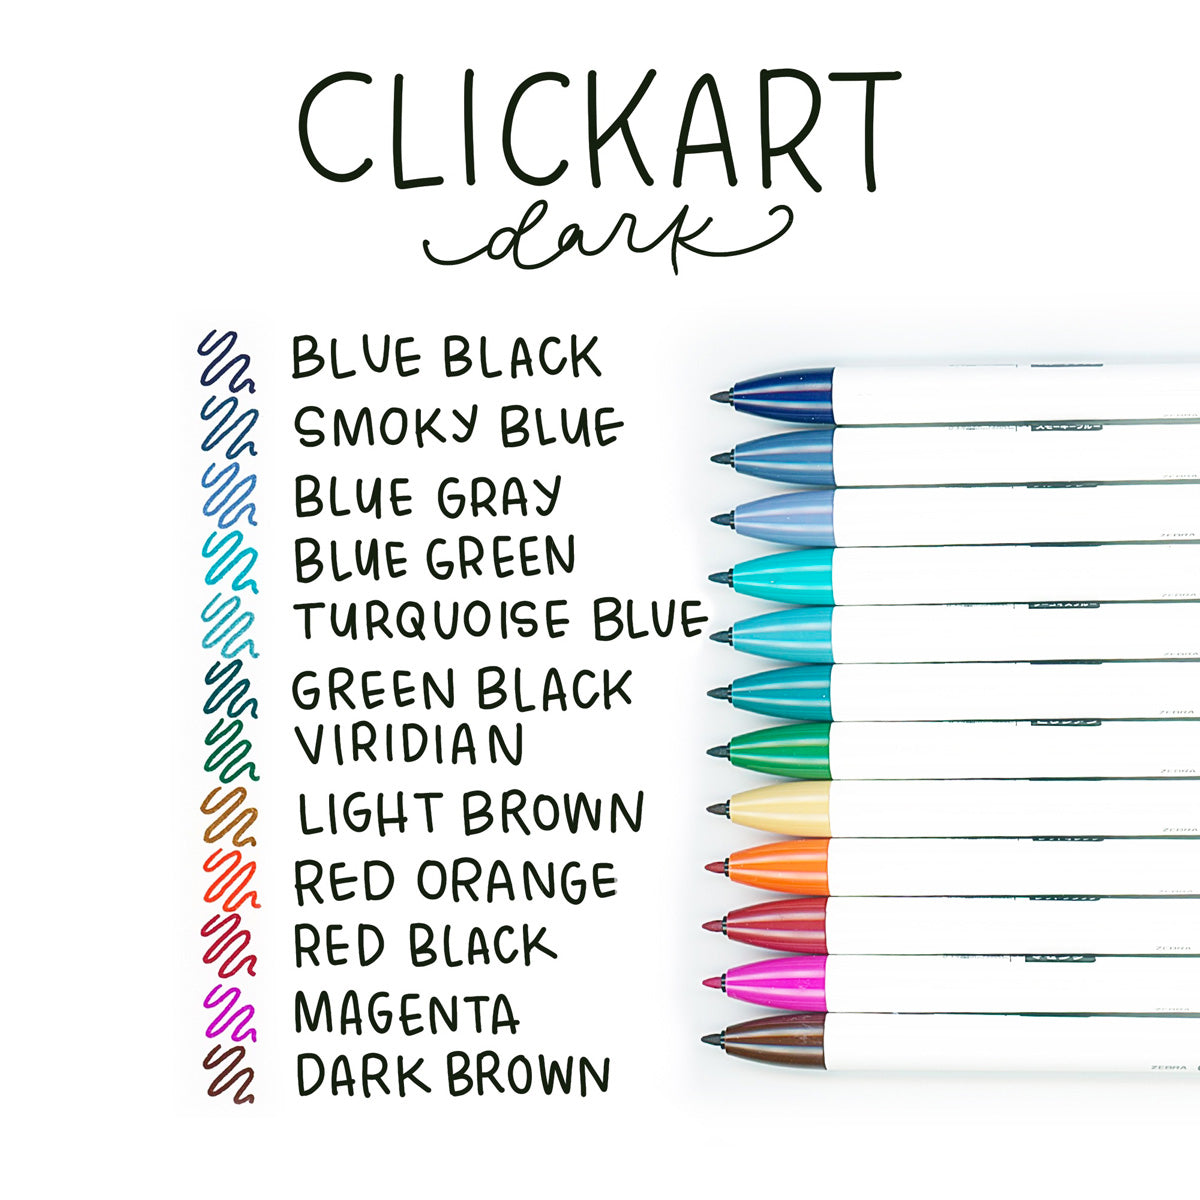 These are amazing! Linked in my Bio. #clickart #stationery #zebra #mar